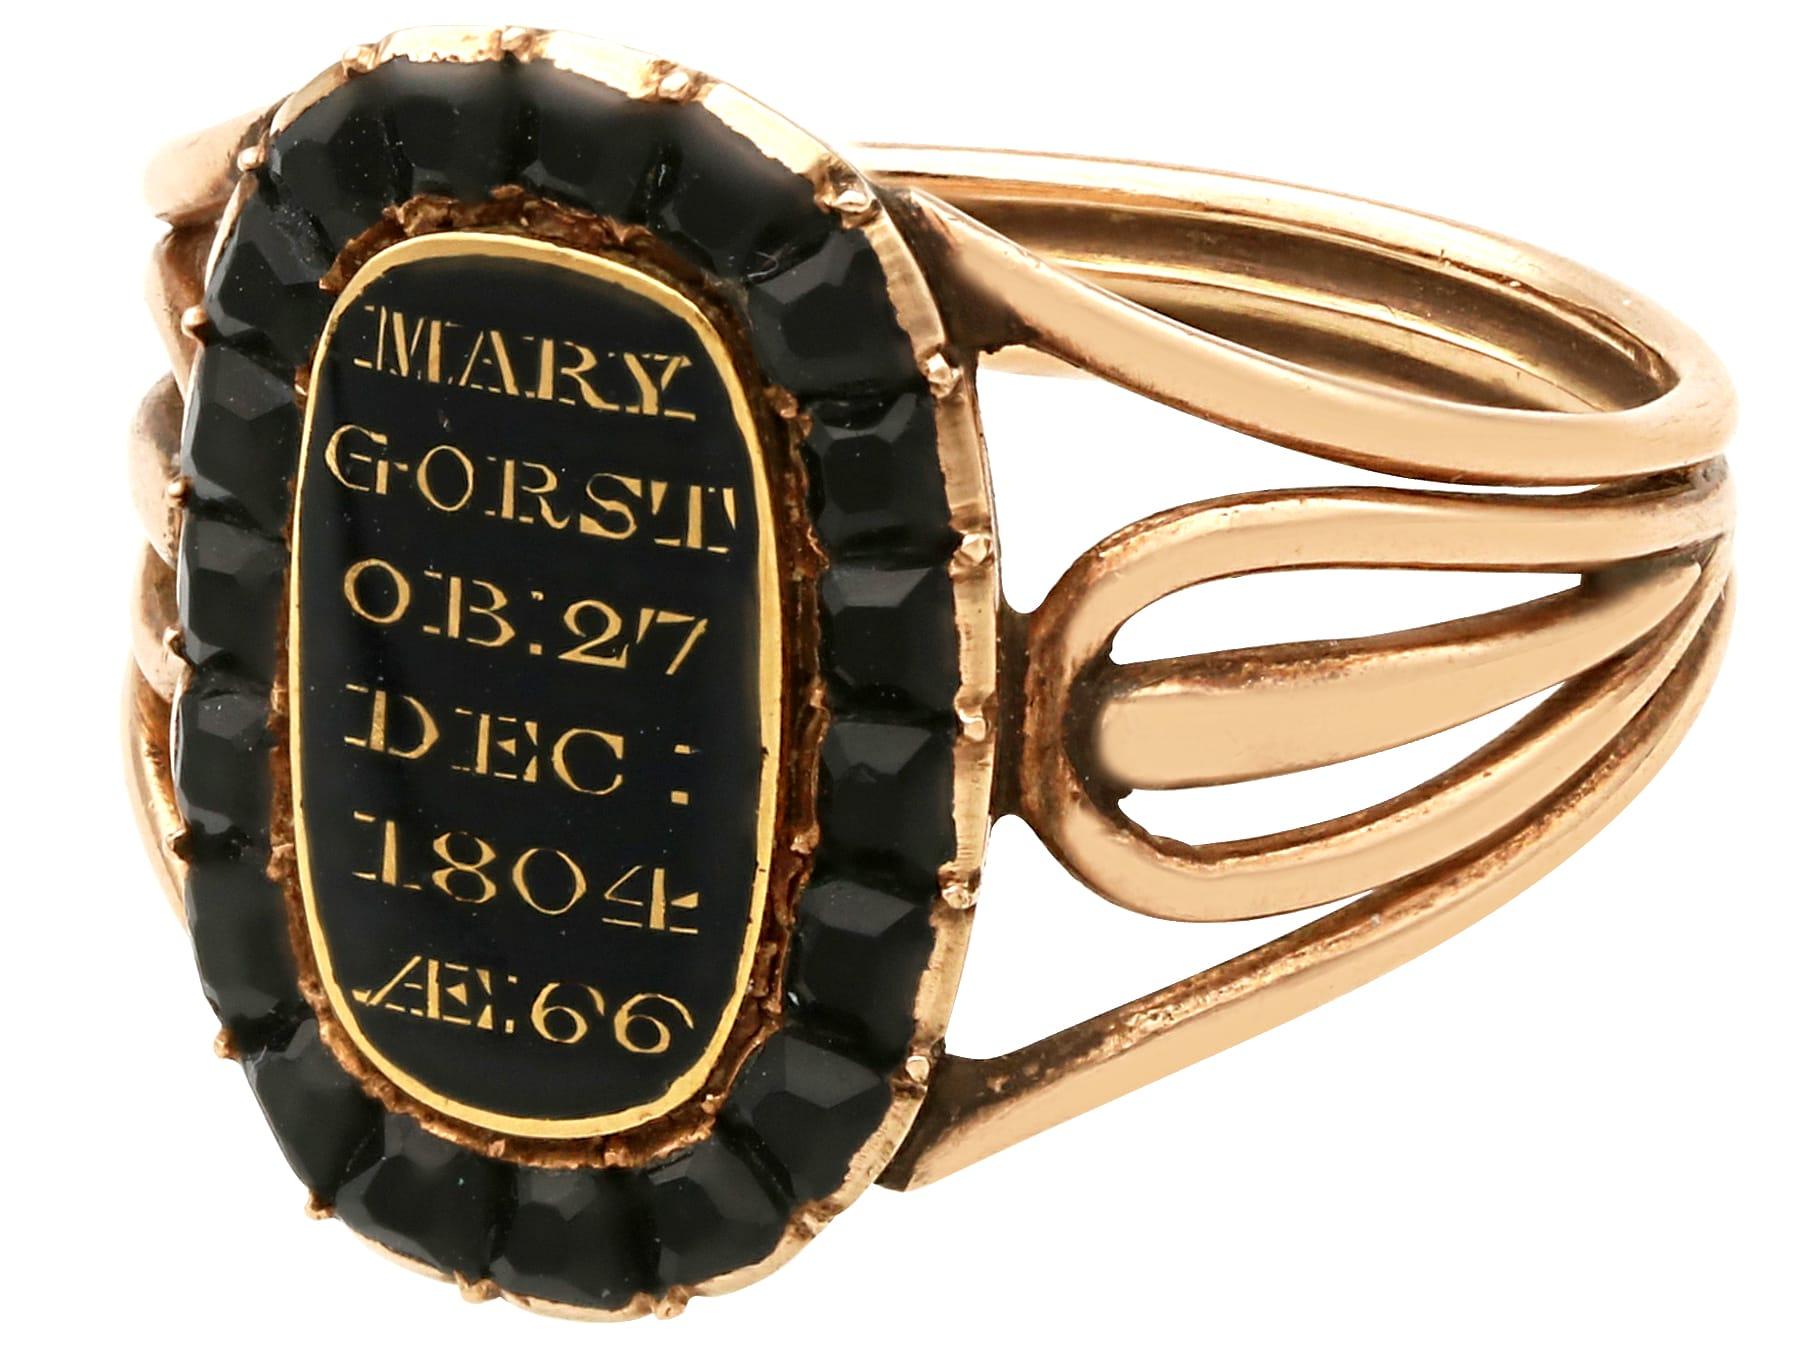 Antique 0.57Ct Jet, Black Enamel and 9k Yellow Gold Mourning Ring Circa 1804 For Sale 1